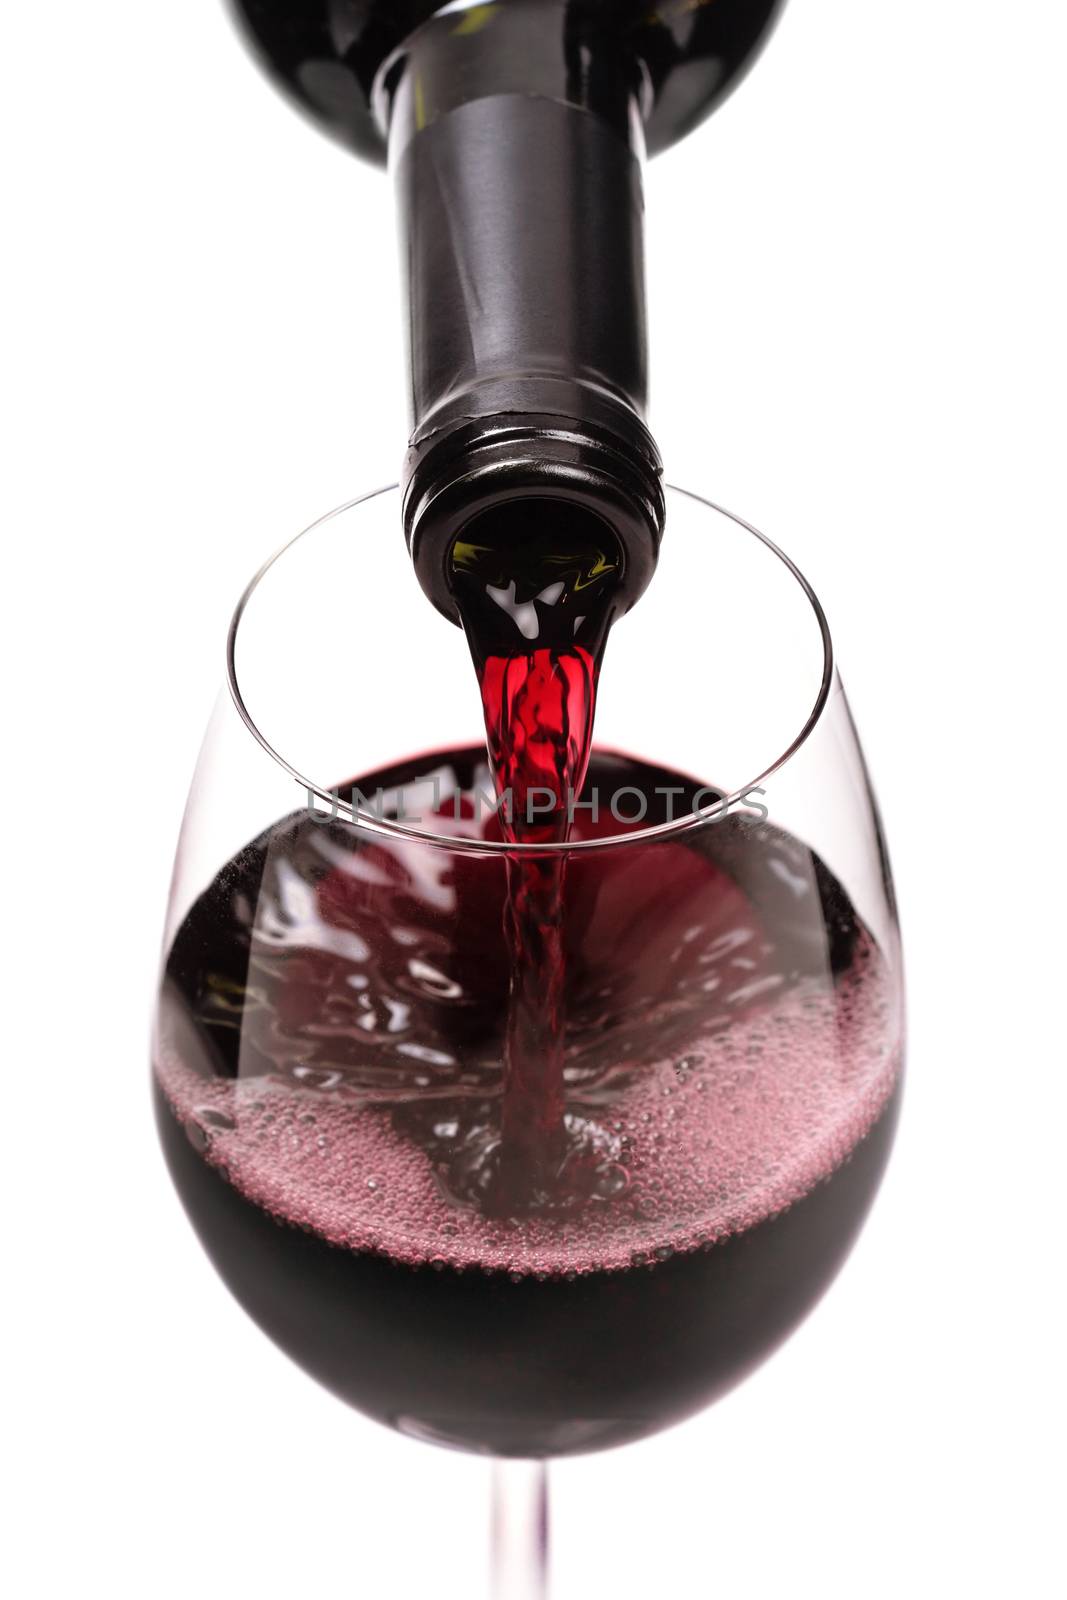 red wine pouring in a glass